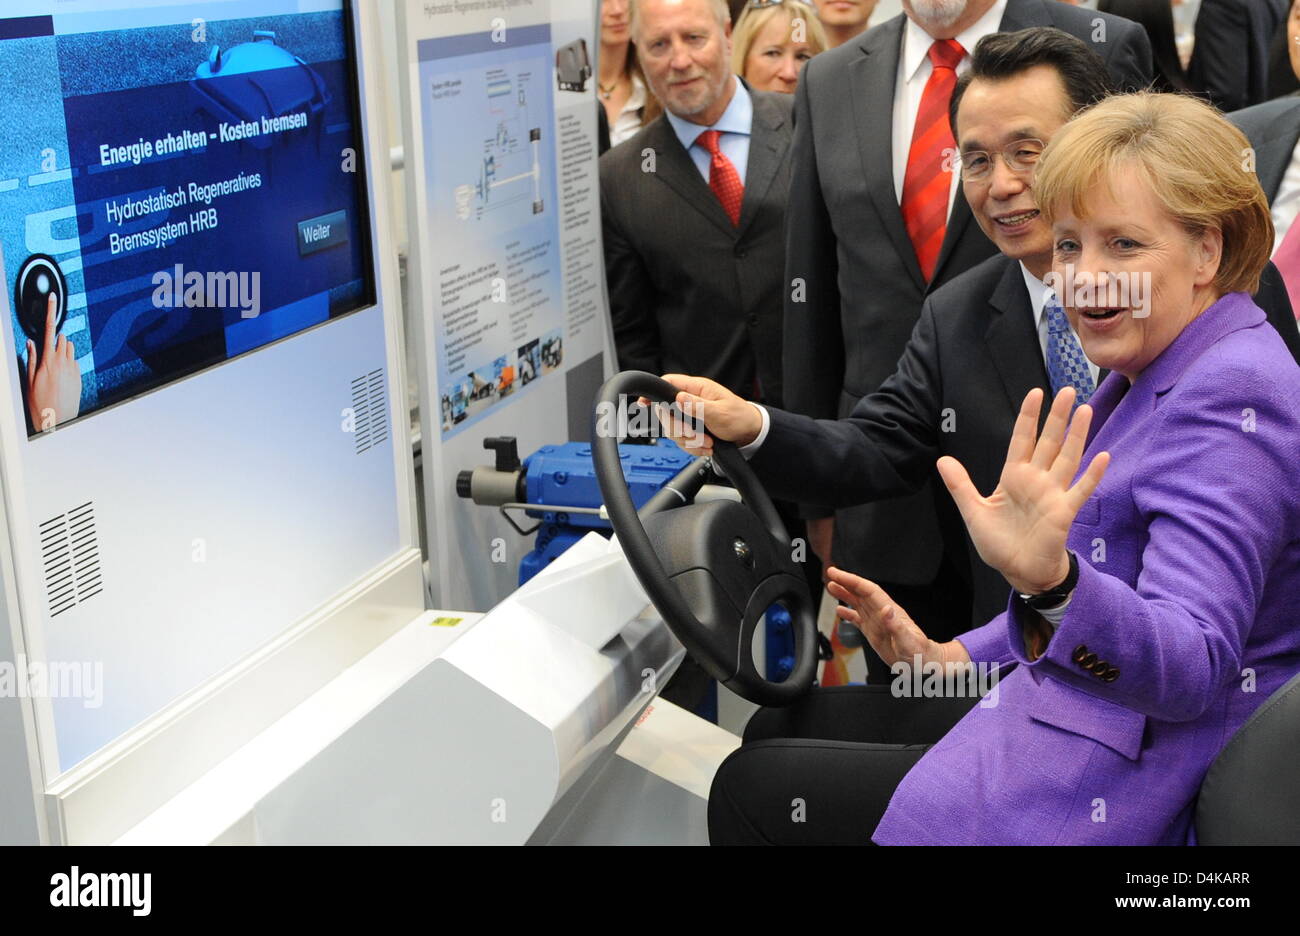 German Chancellor Angela Merkel (R) and South Korea?s Prime Minister Han Seung-Soo (2-R) pose behind the steering wheel of a lorry mockup presenting the hydrostatic regenerative brake system designed by ?Bosch Rexrodt? during their opening round tour at the Hannover Messe 2009 trade fair in Hanover, Germany, 20 April 2009. Some 6,150 companies from 61 nations showcase their latest  Stock Photo